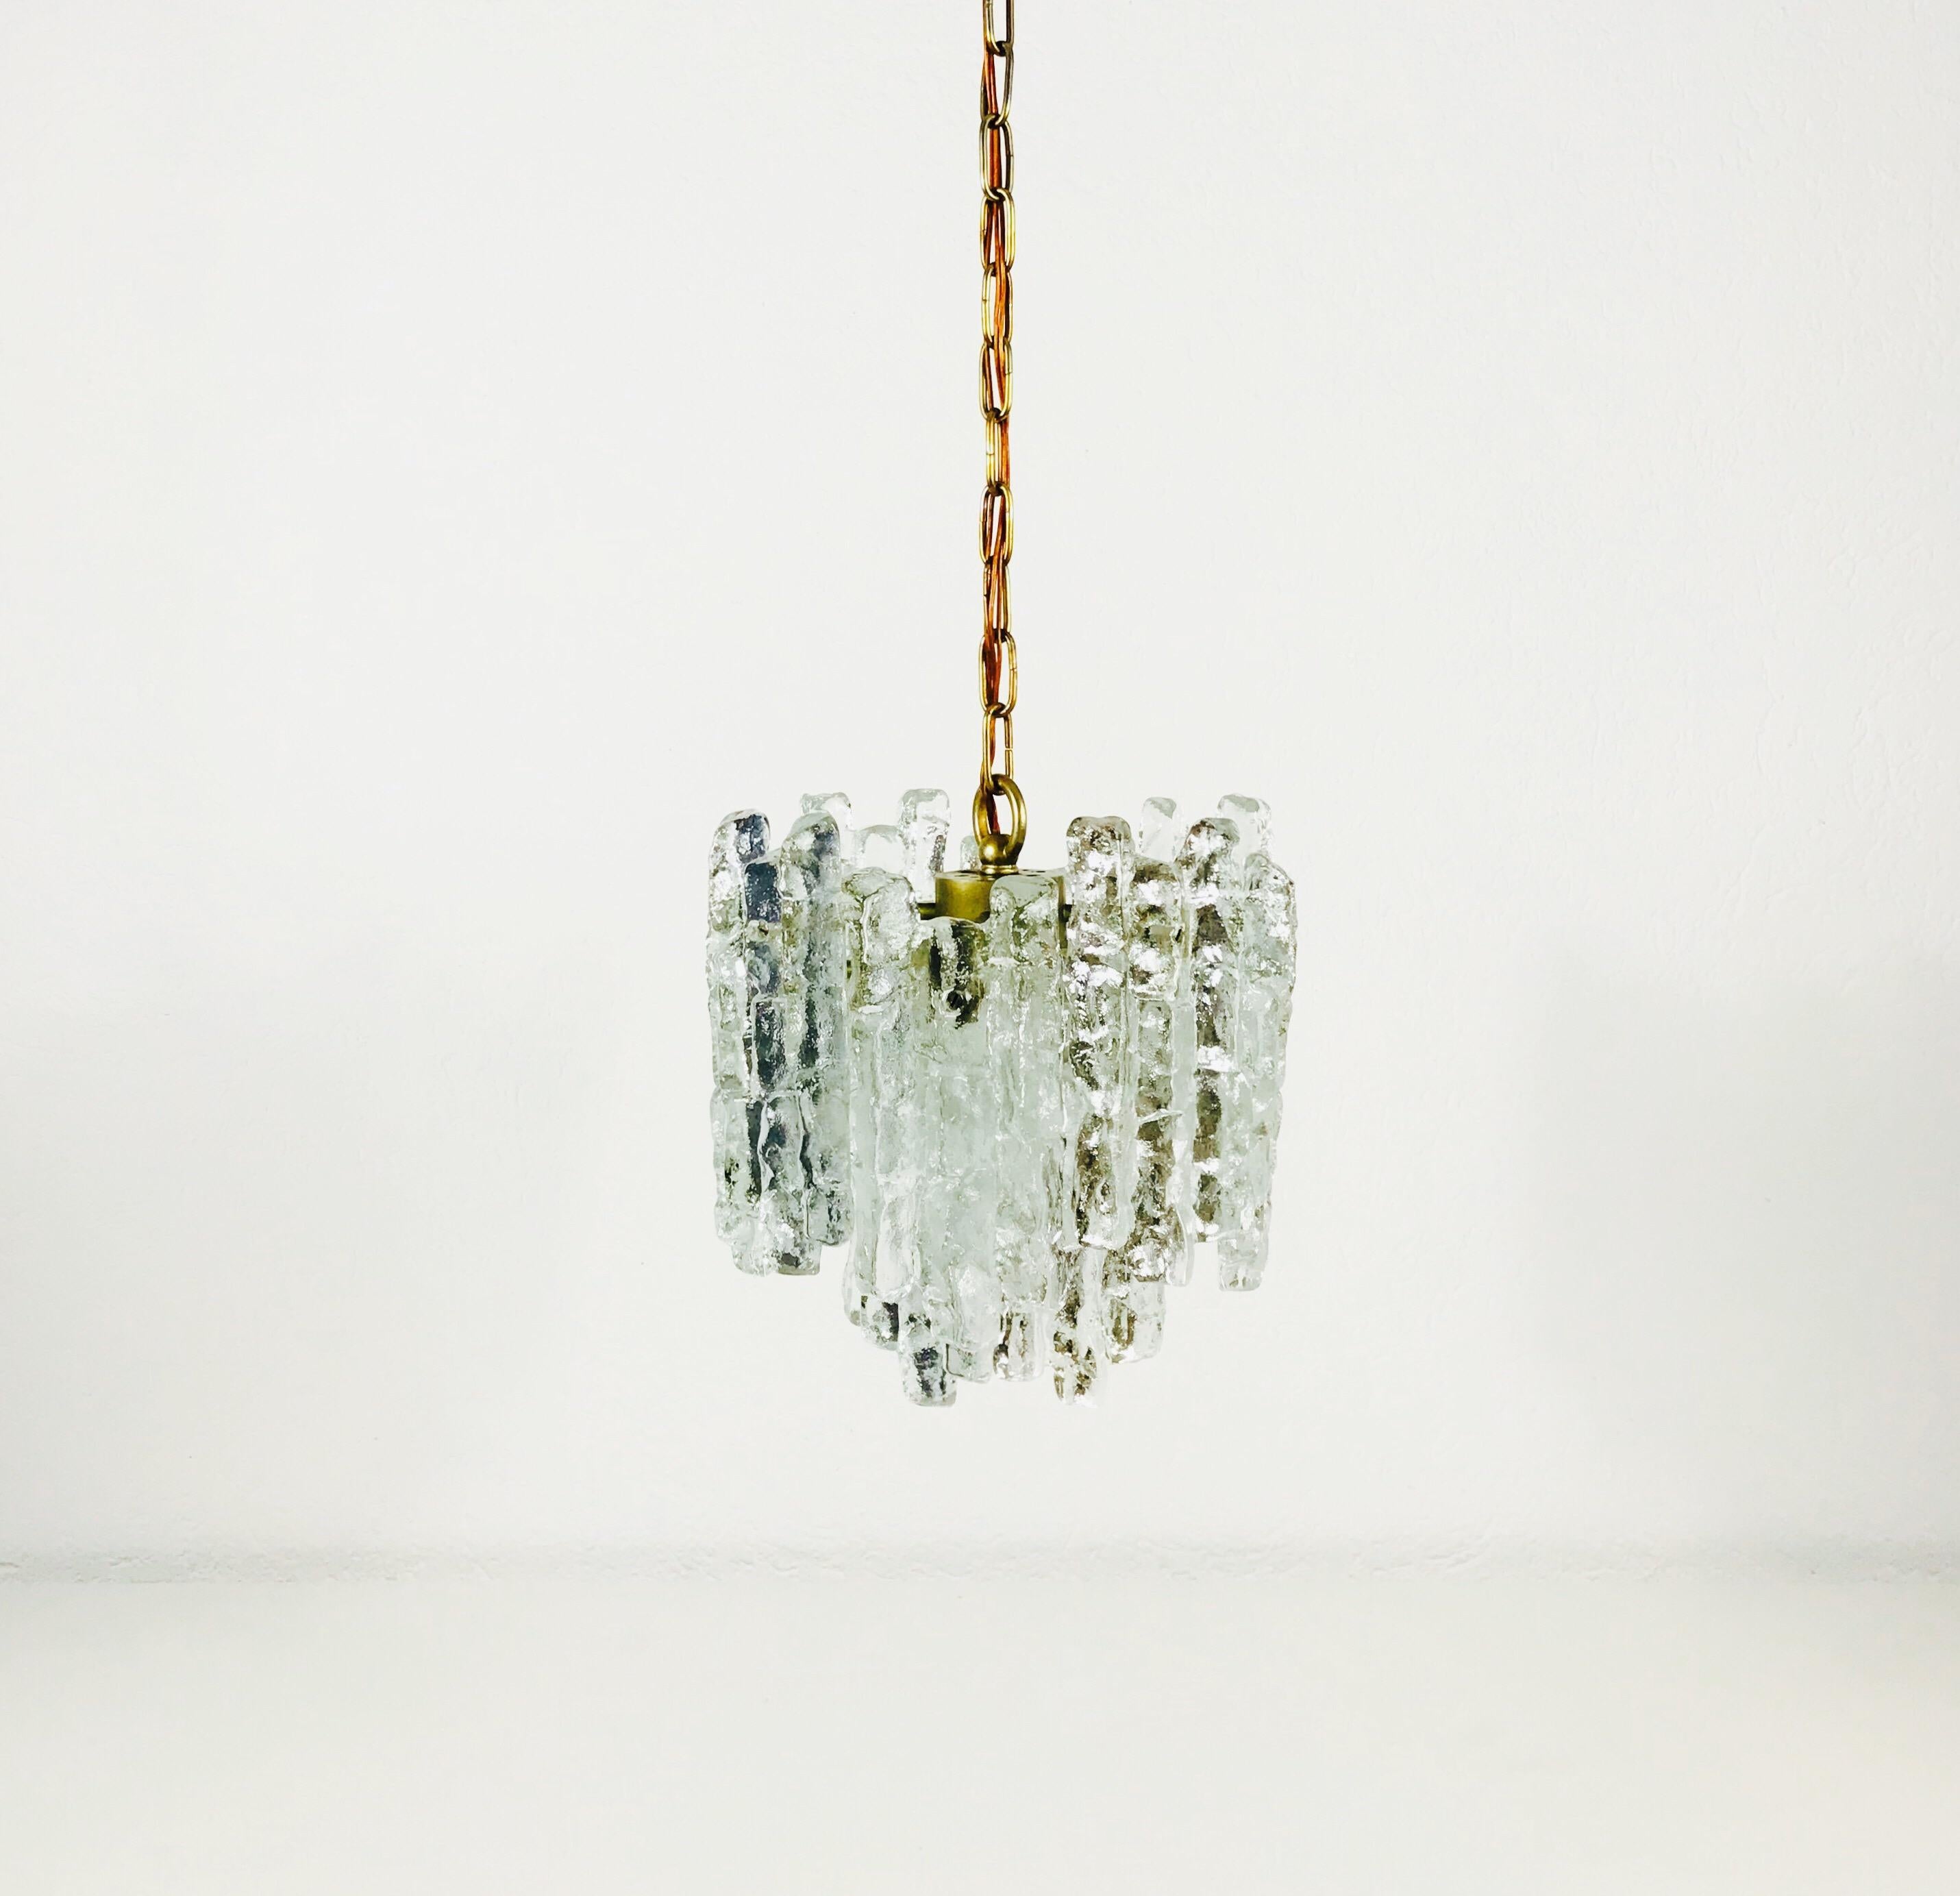 Brass Midcentury Ice Crystal Glass Pendant Light or Chandelier by Kalmar, circa 1960s For Sale